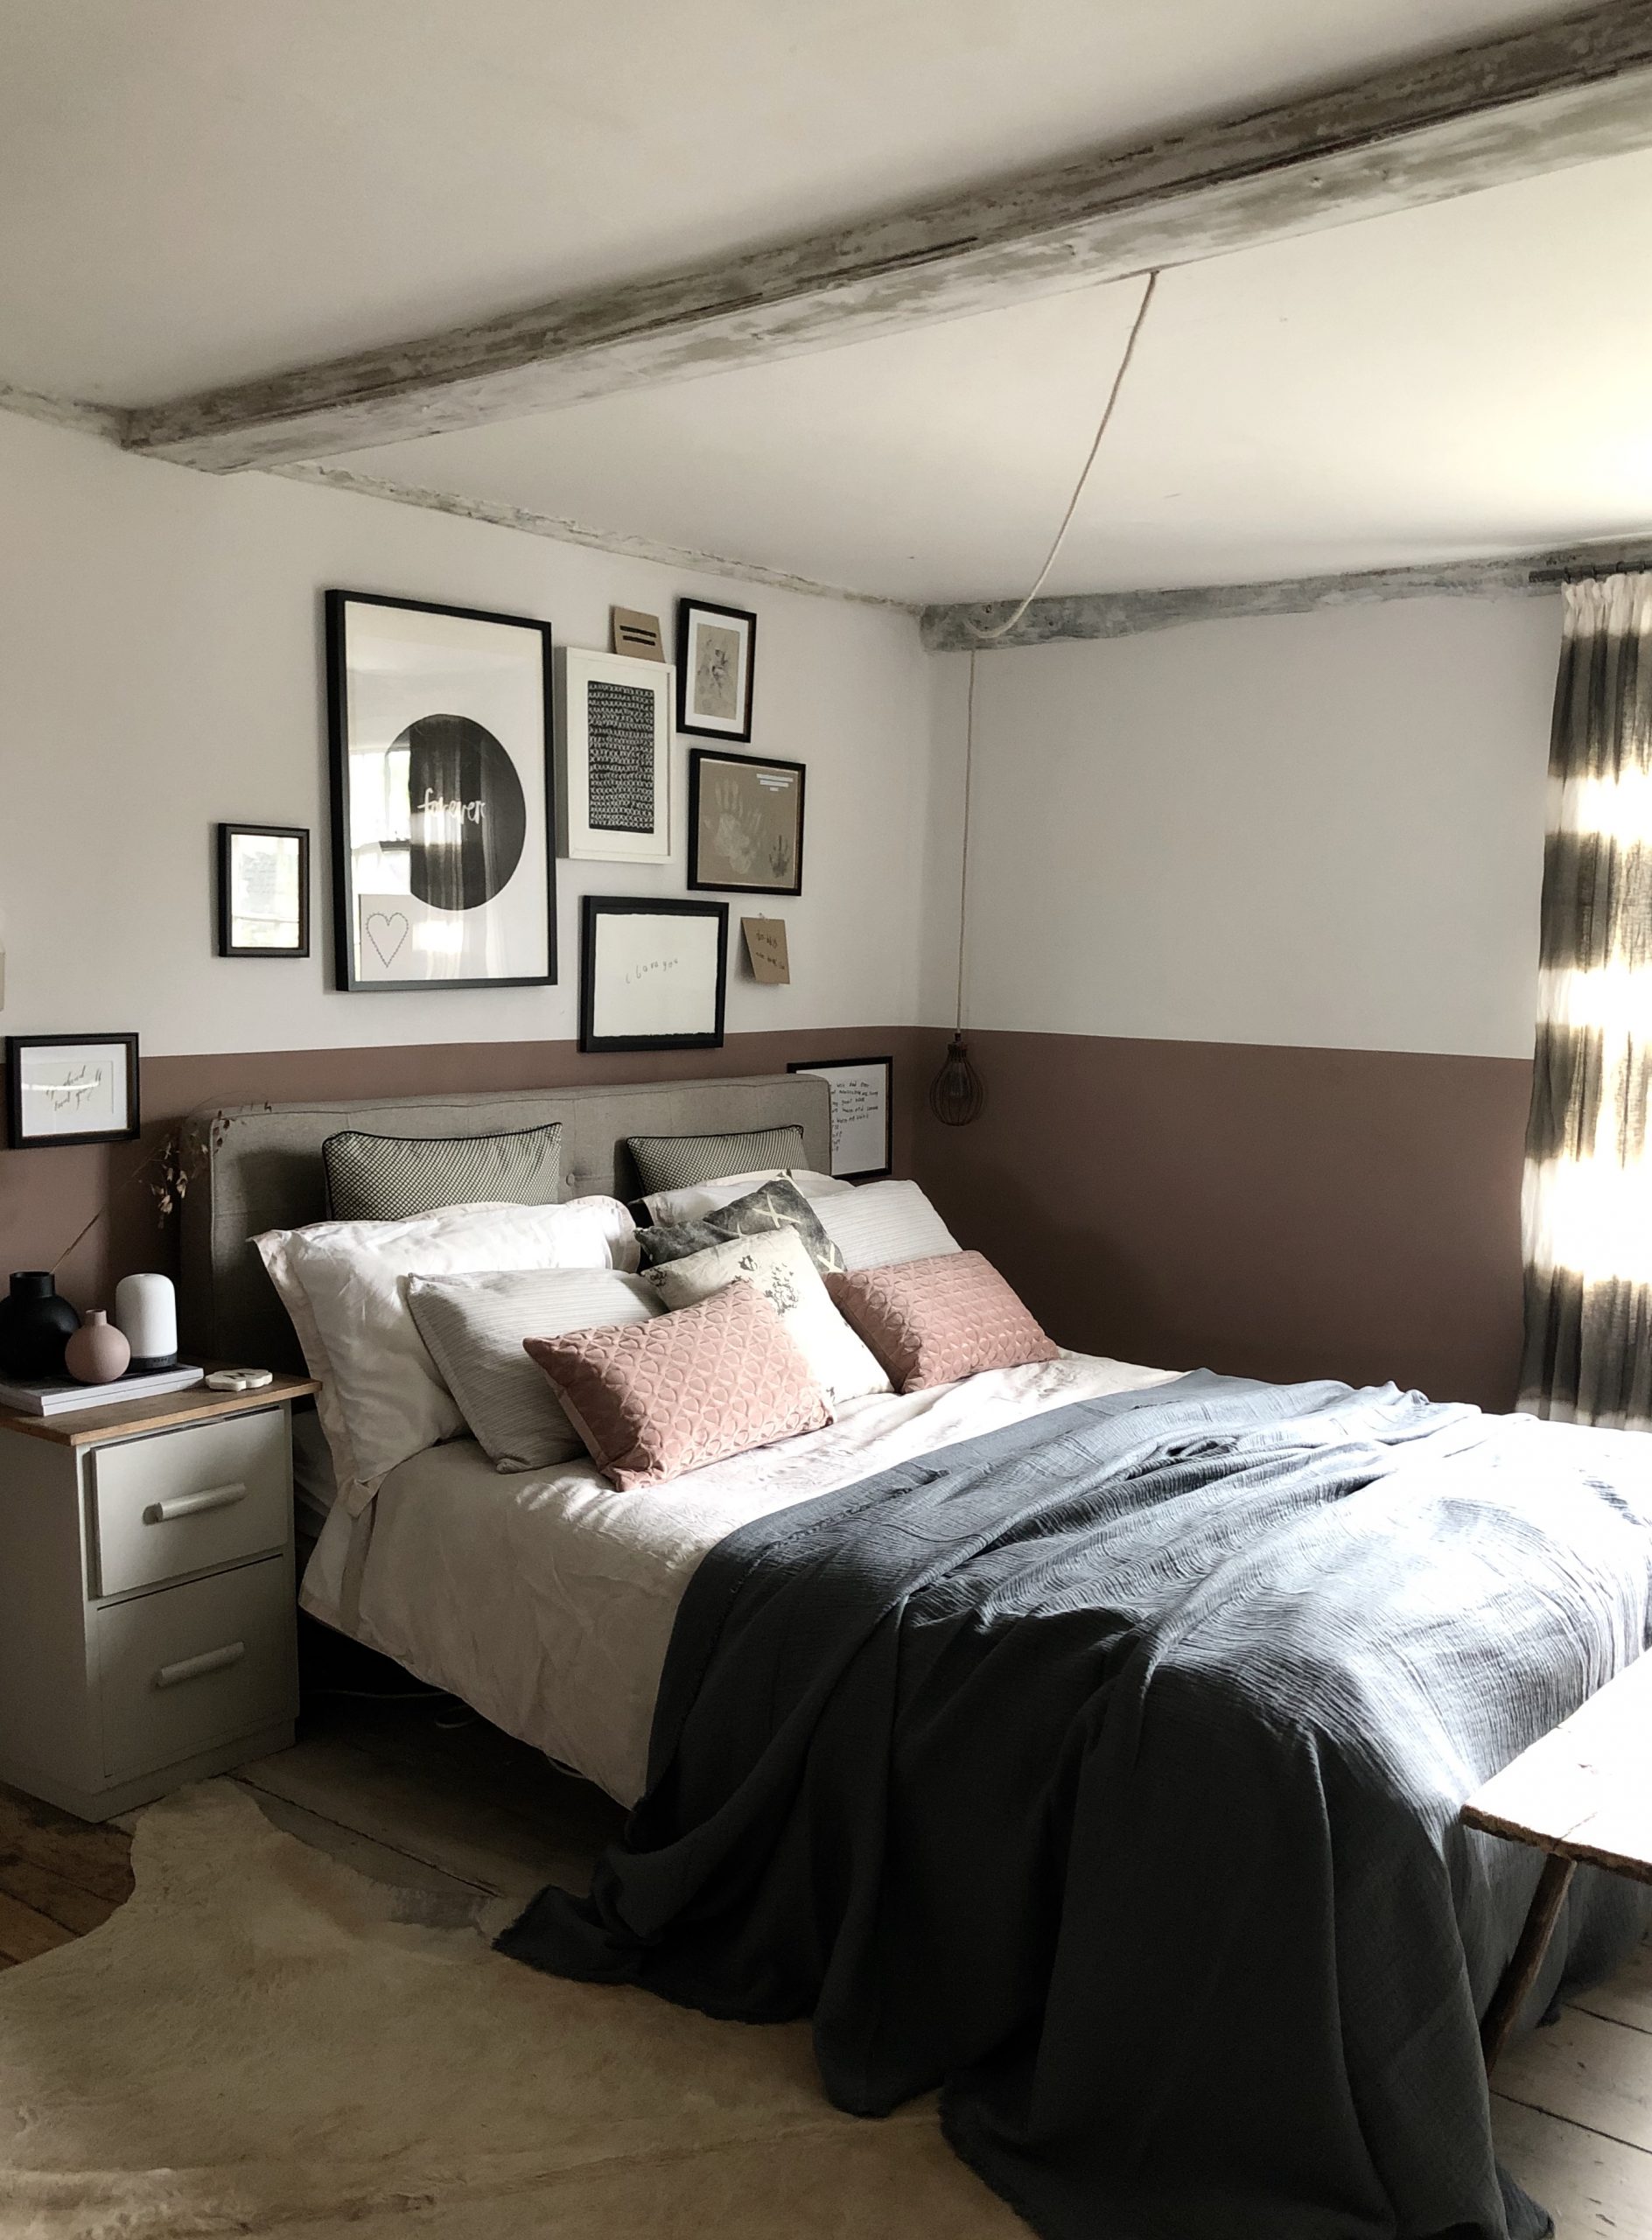 Modern country bedroom makeover. Soft terra cotta half height painted walls, natural linens and gallery wall.